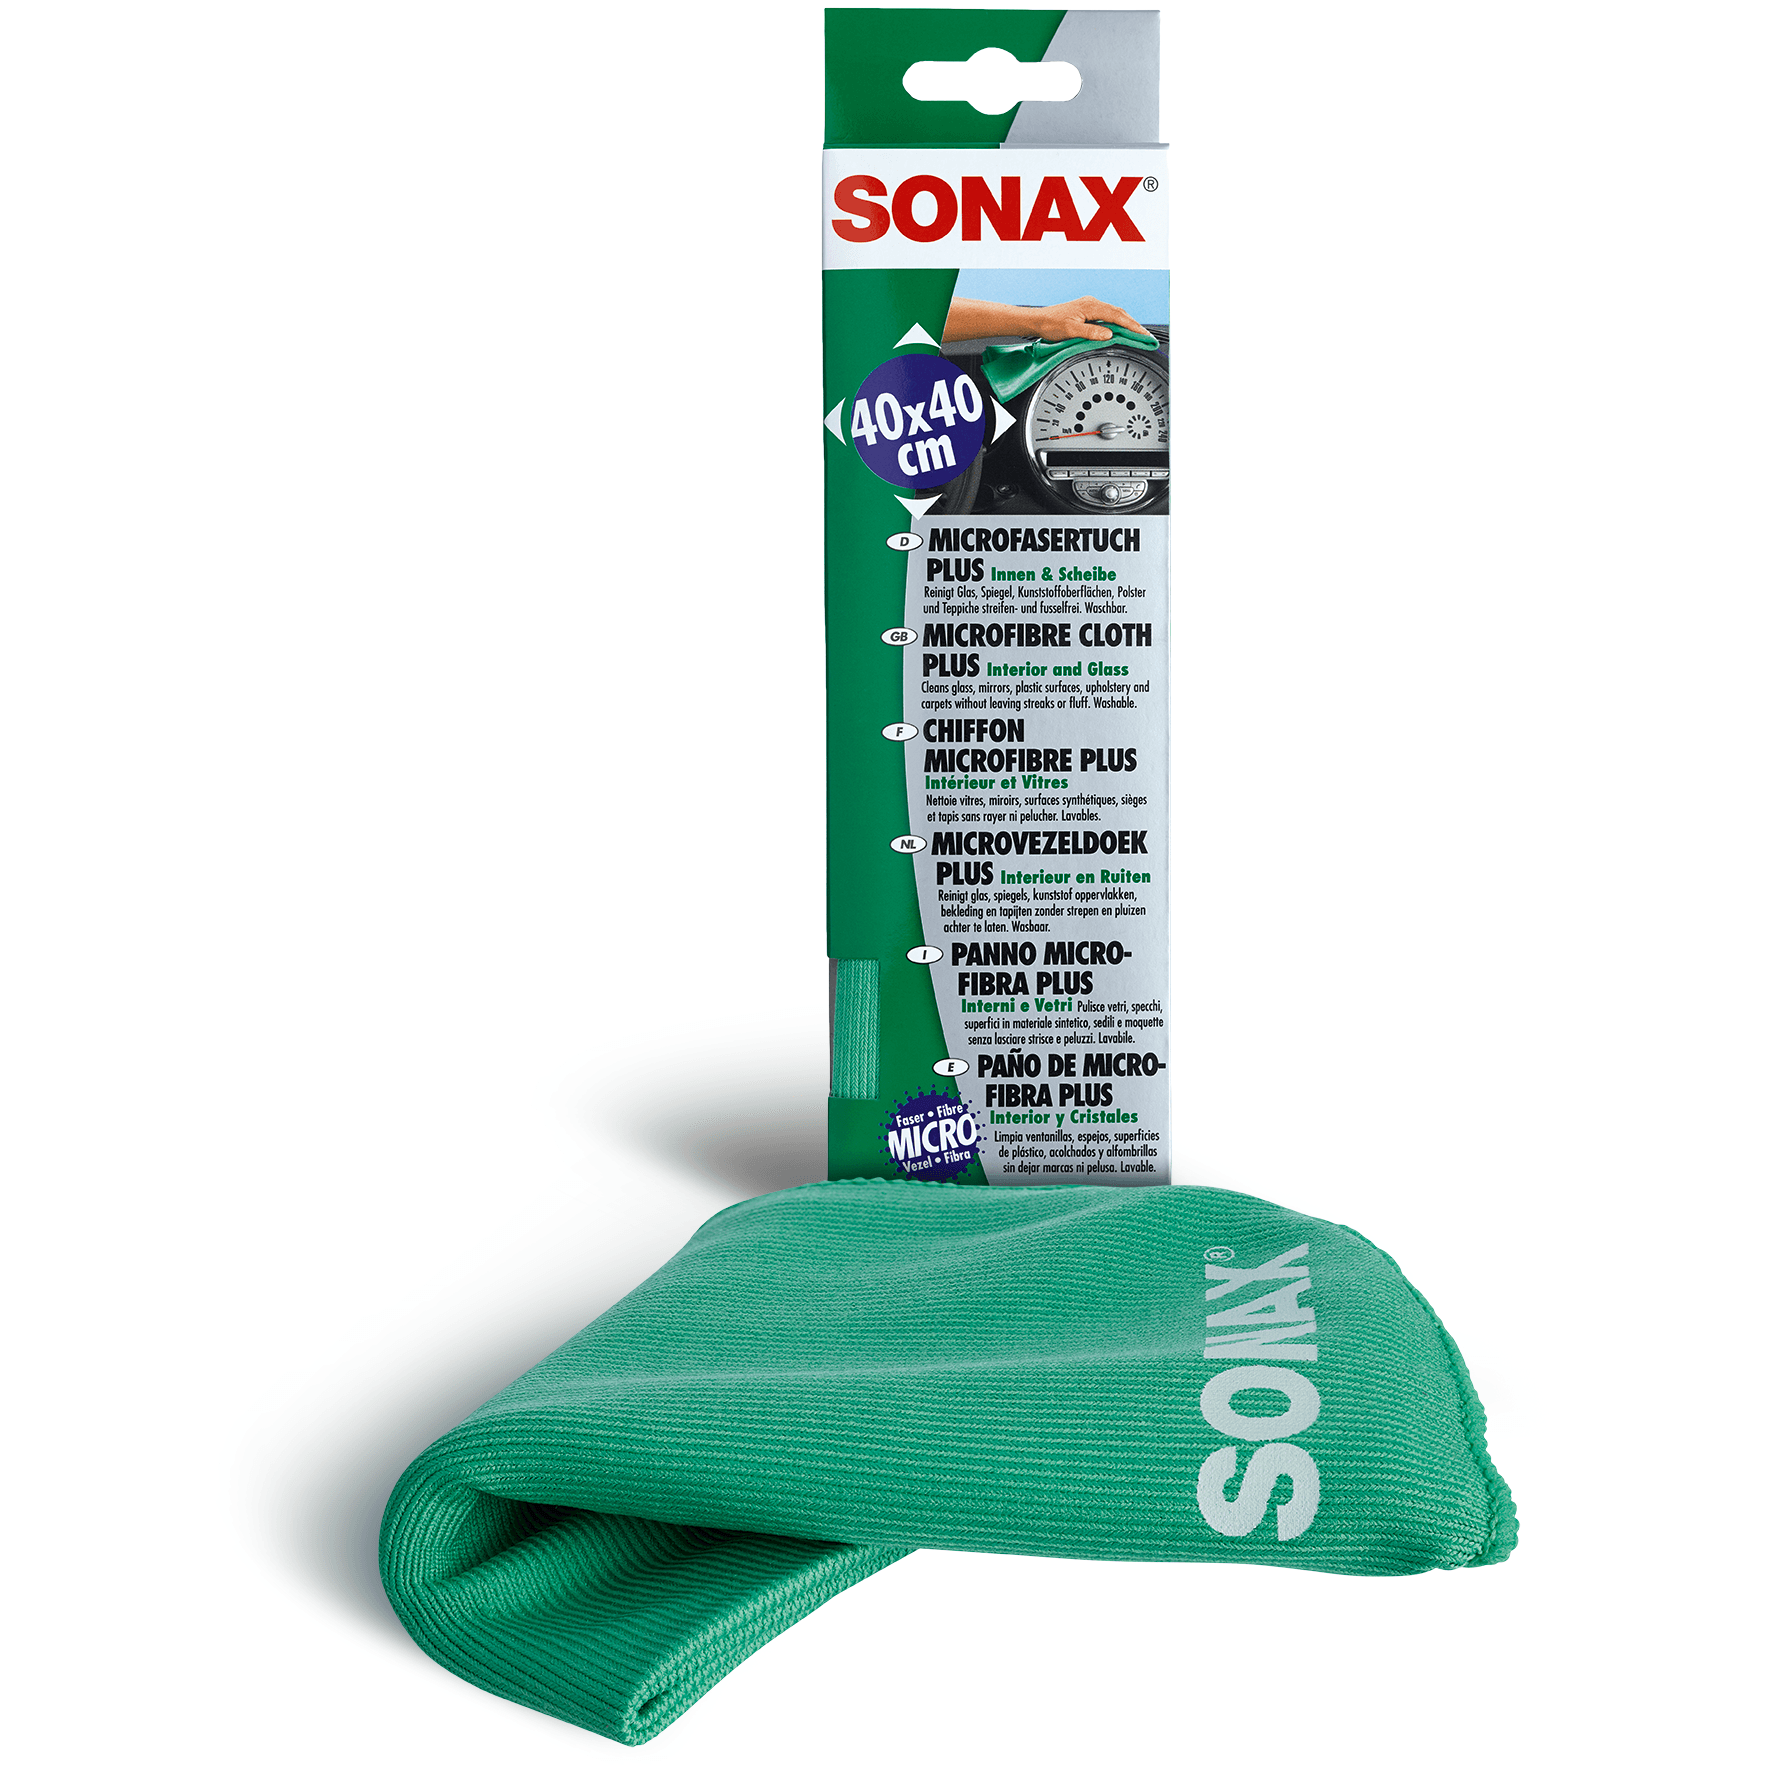 SONAX Microfiber Klud Glas - Xpert Cleaning